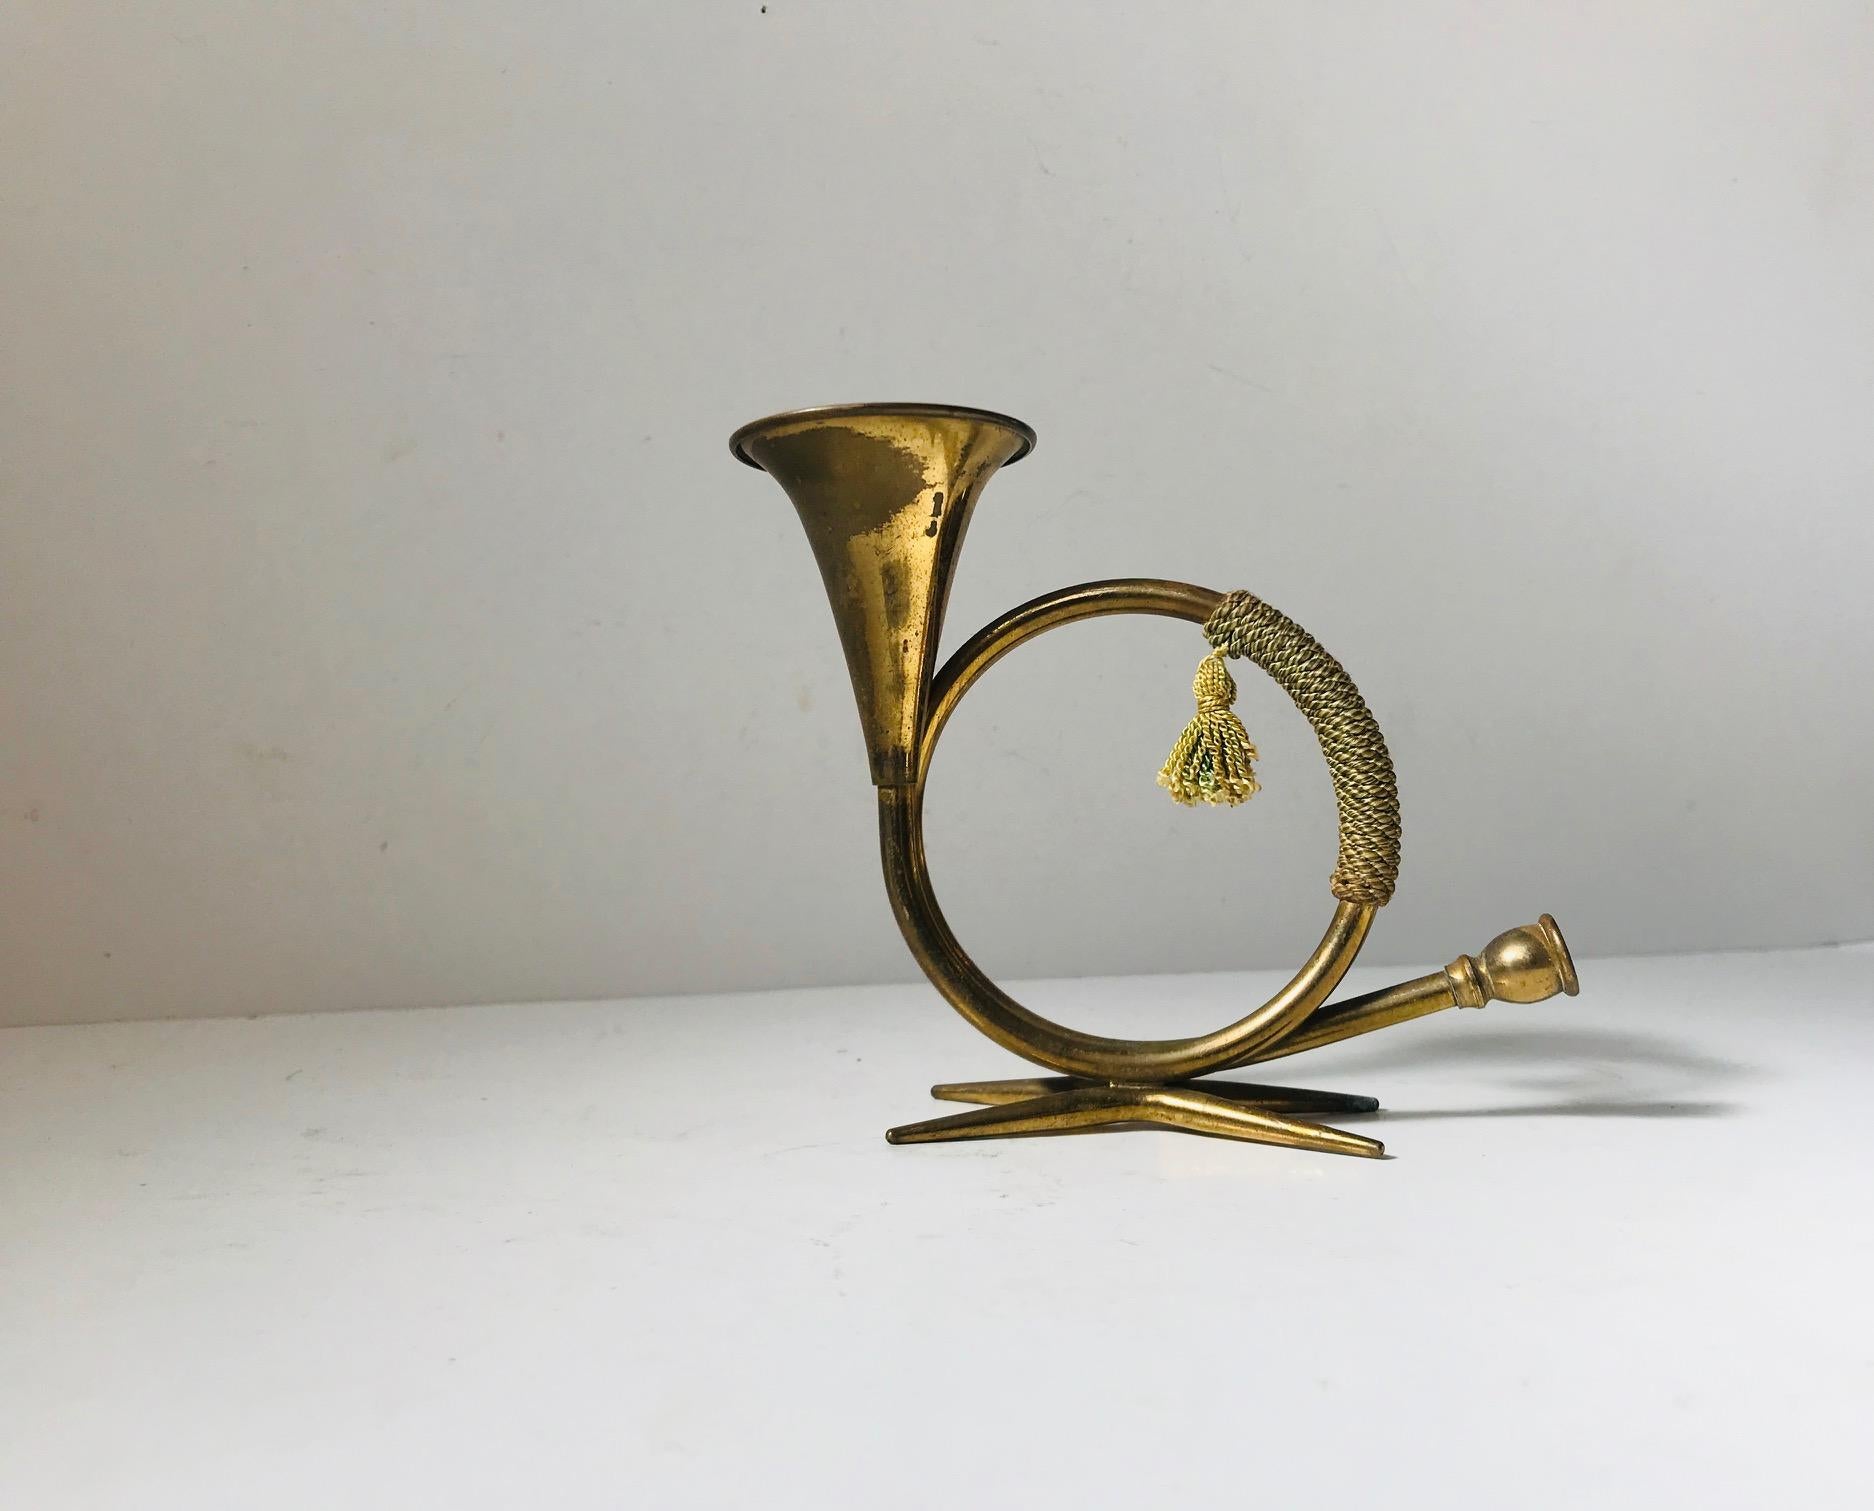 Curious and decorative candleholder shaped as a hunting horn. Designed and manufactured in Austria in a style reminiscent of Carl Auböck and Hagenauer. Candle size: regular.